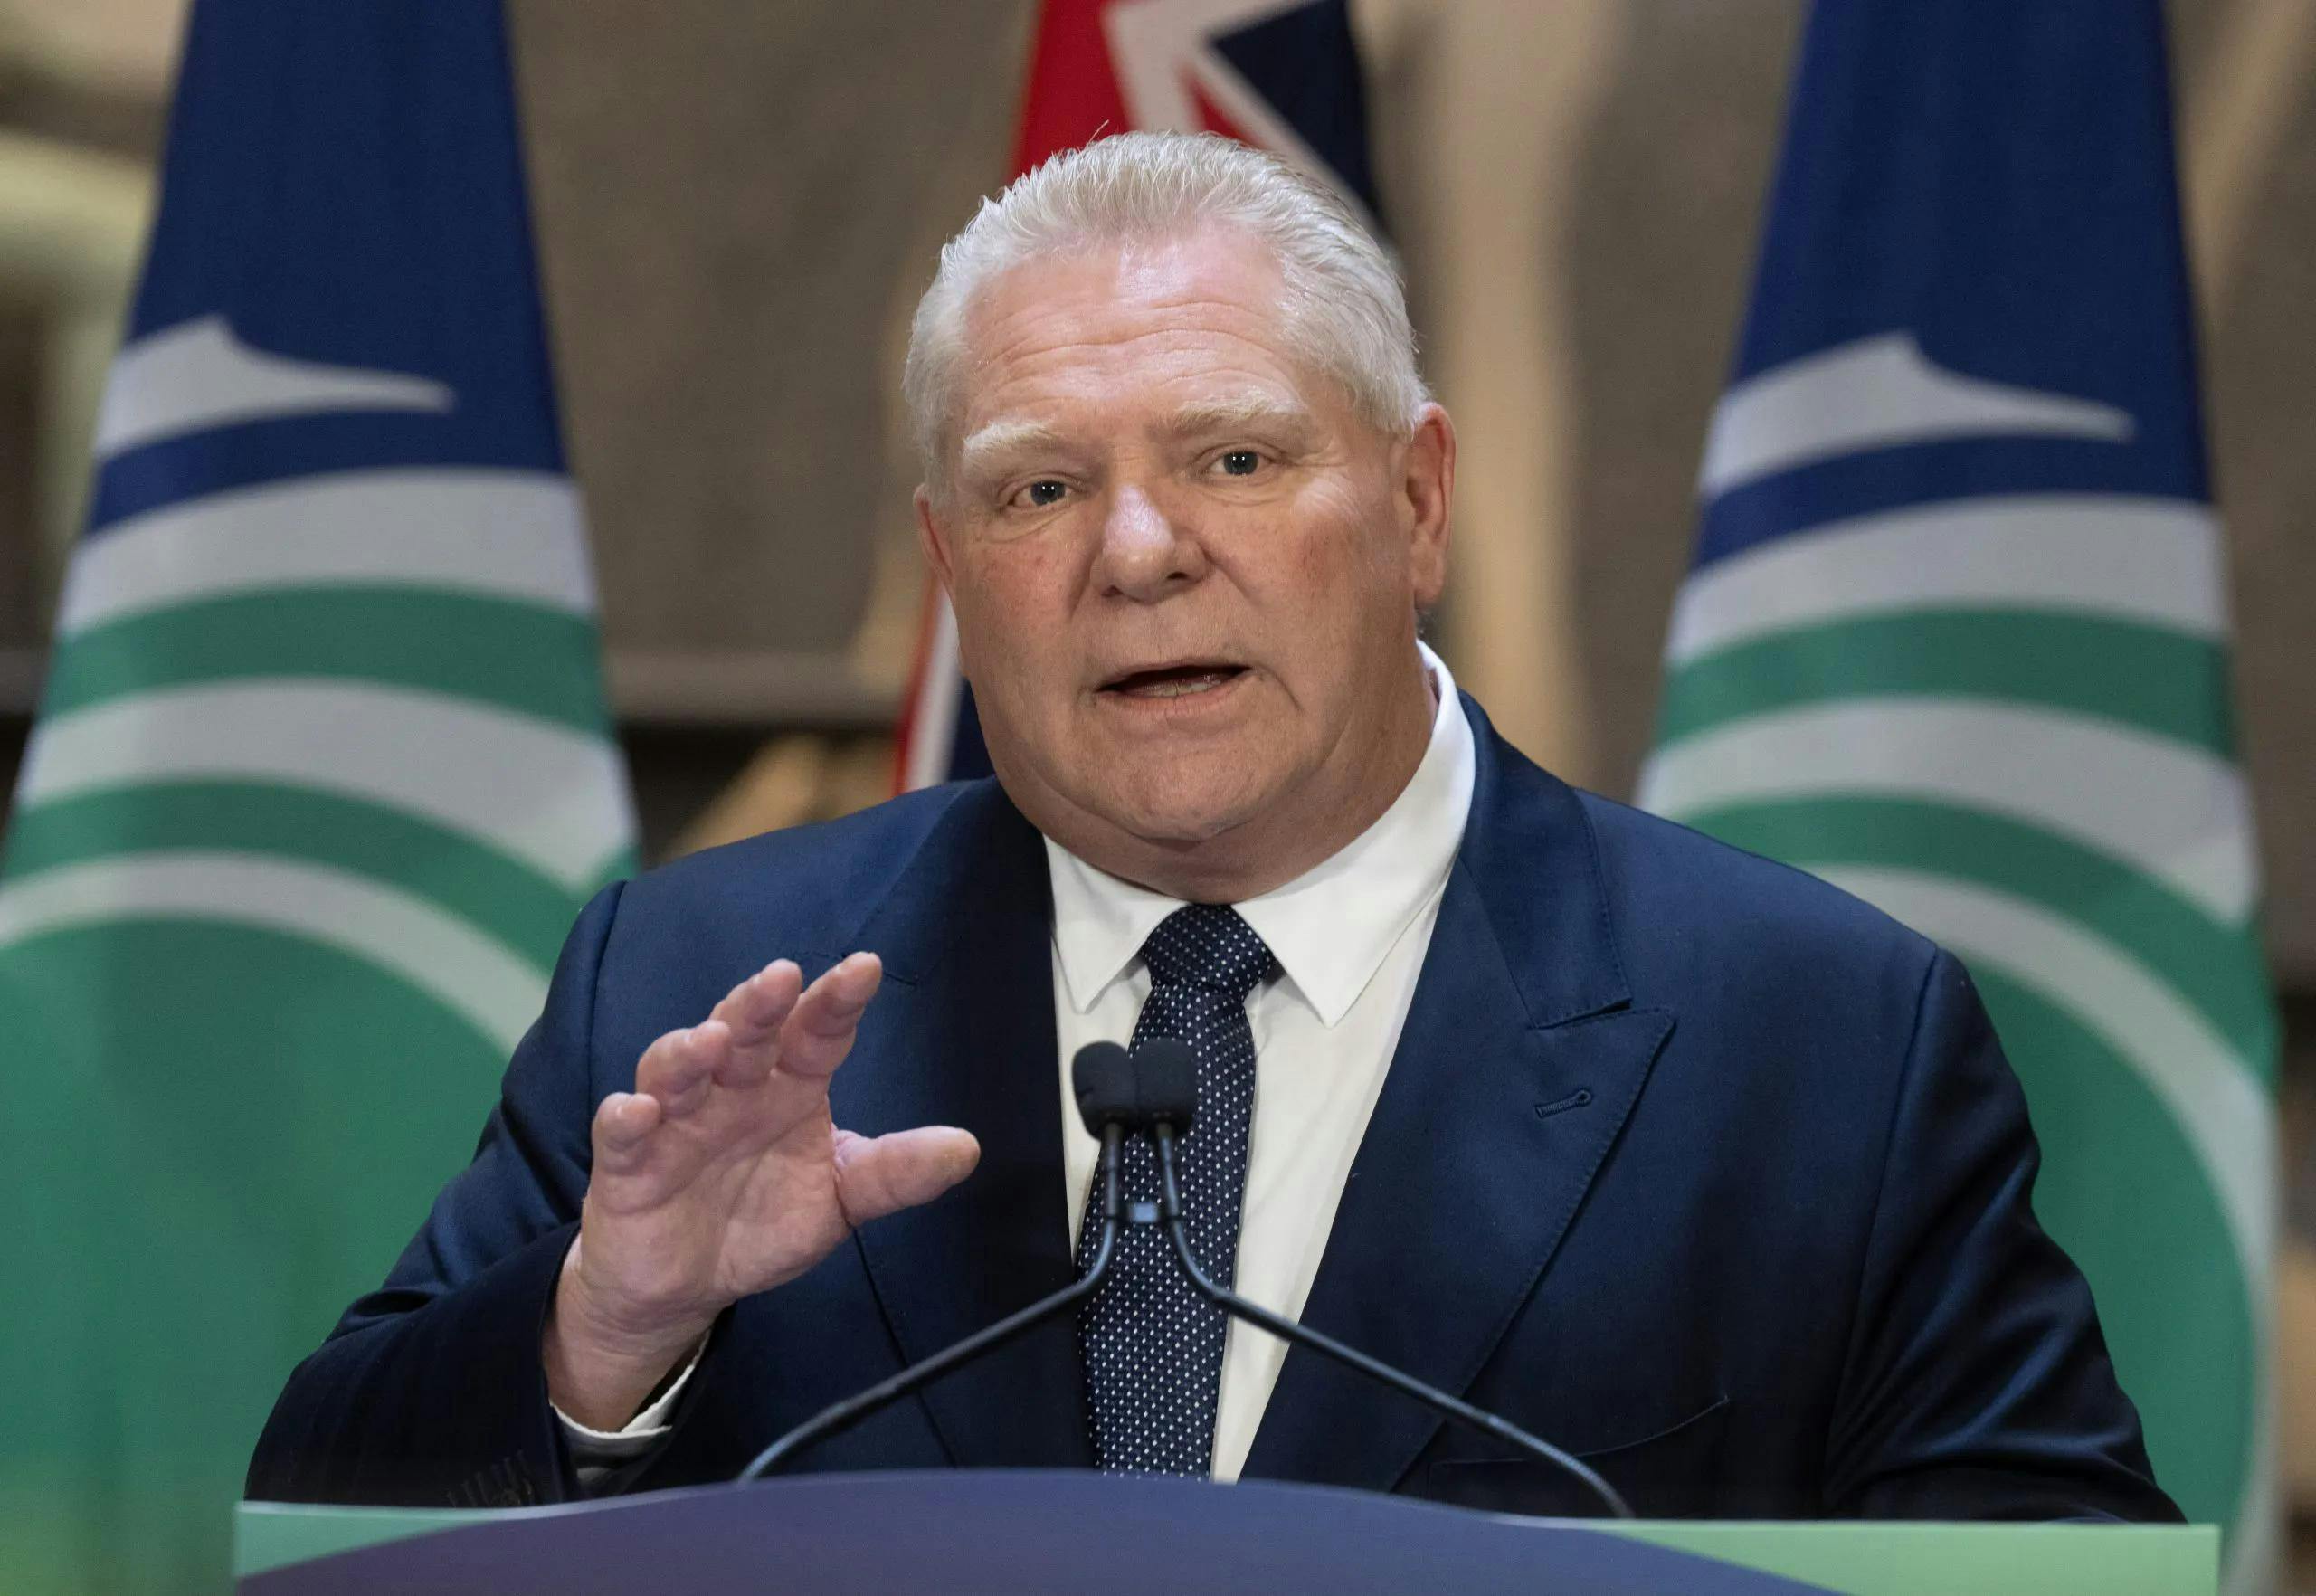 ‘Let’s beef that up’: Ford calls for more scanners at Port of Montreal to curb auto theft